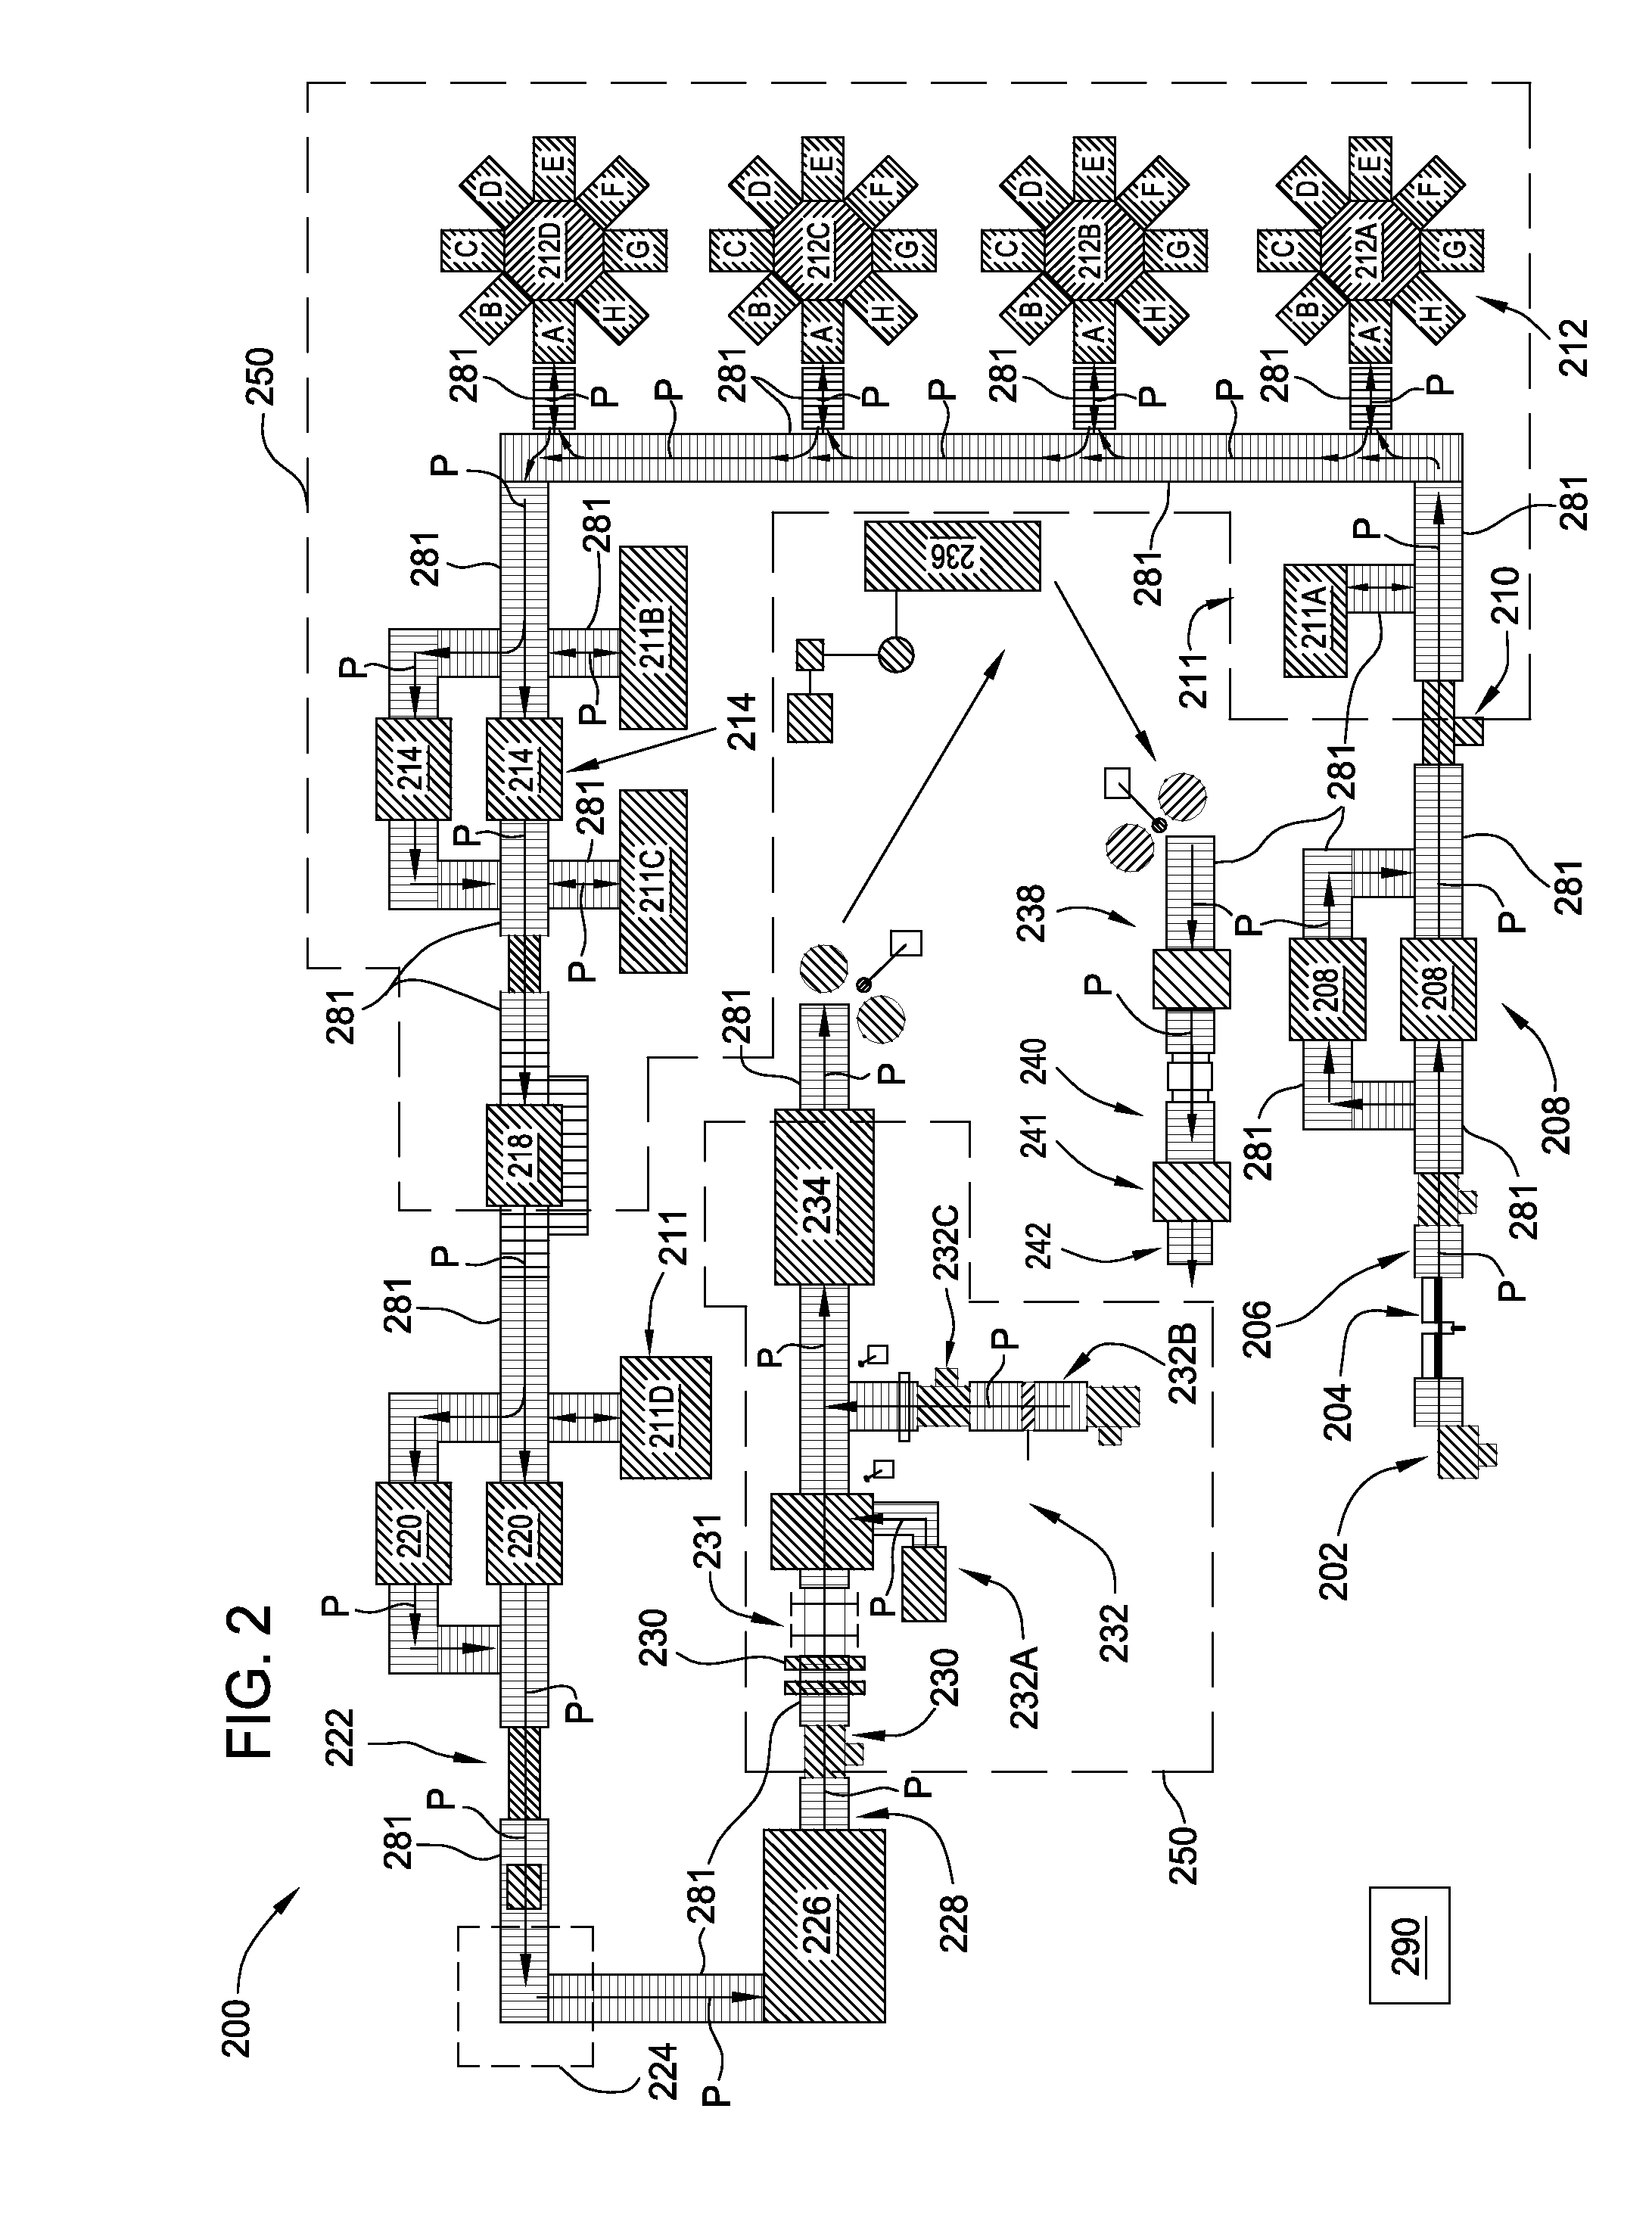 Photovoltaic cell reference module for solar testing